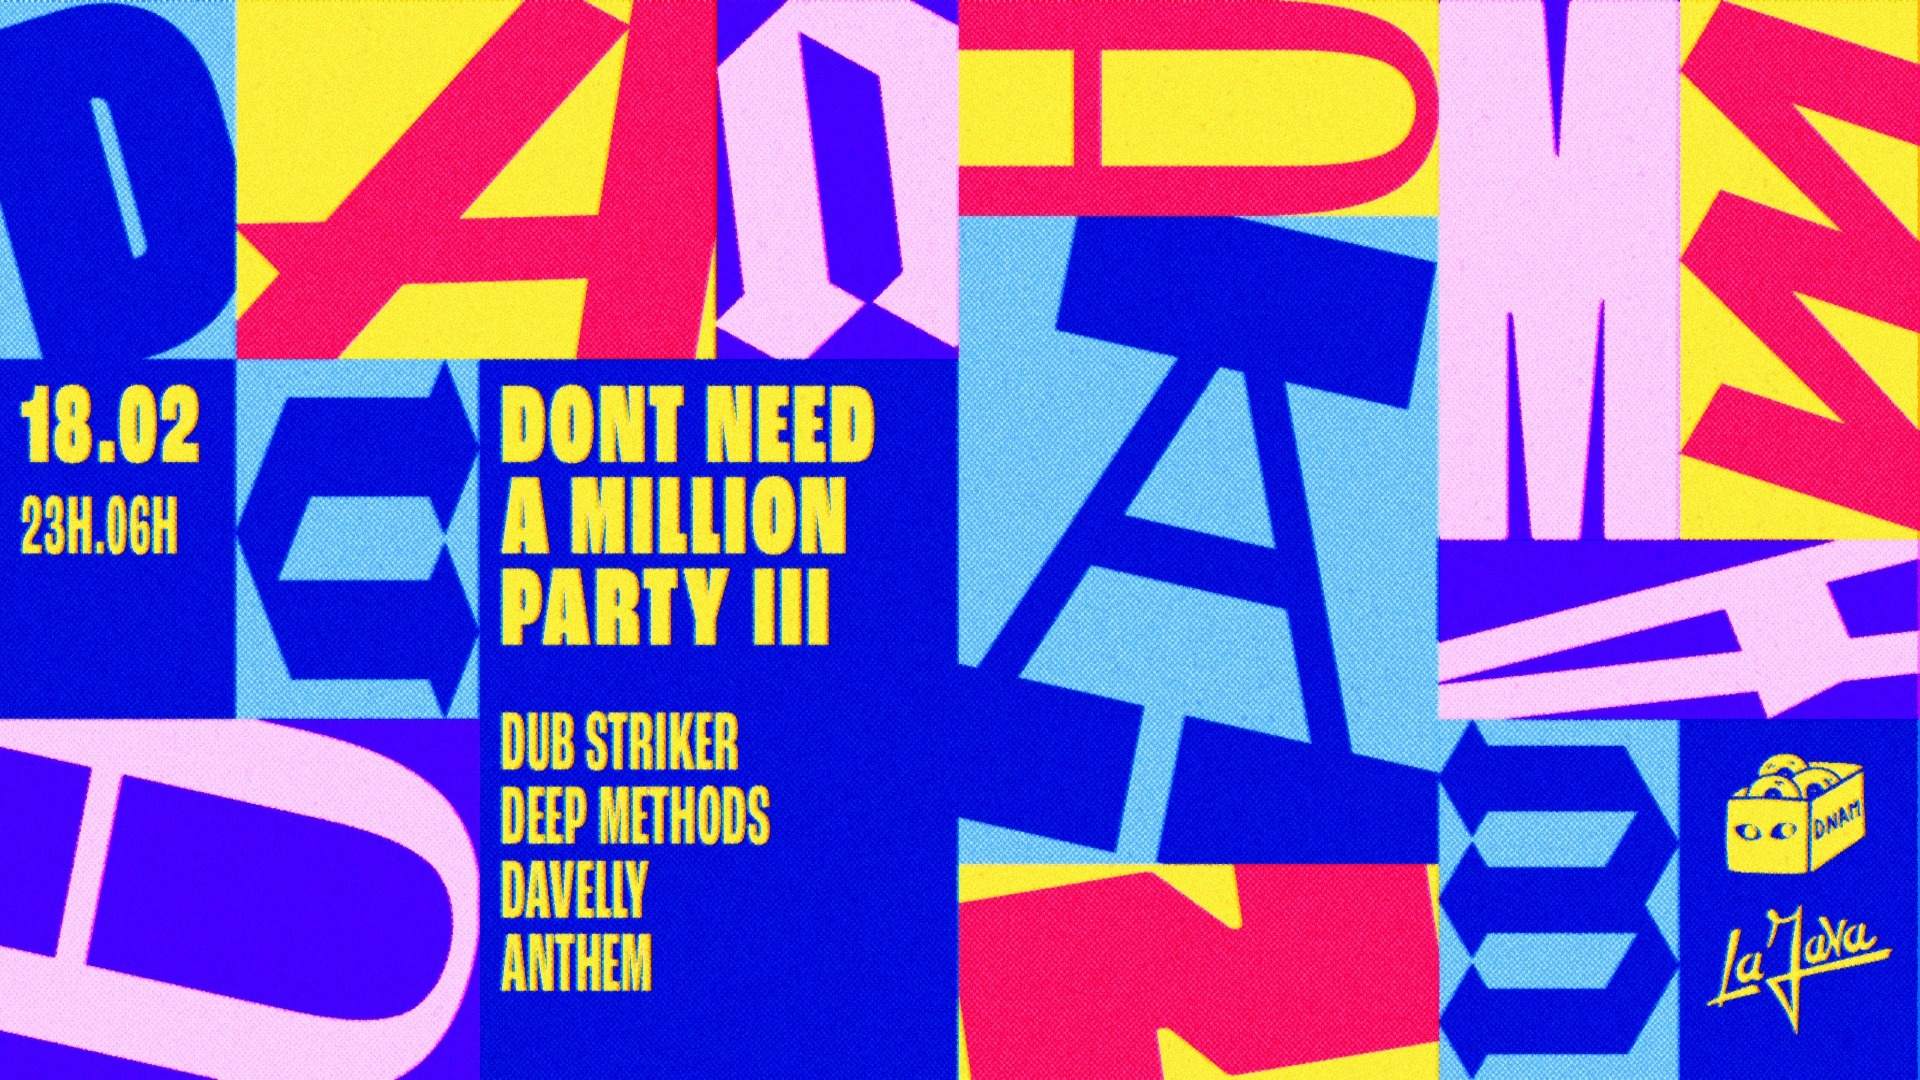 DONT NEED A MILLION PARTY III: Dub Striker, DEEP METHODS & MORE - フライヤー表